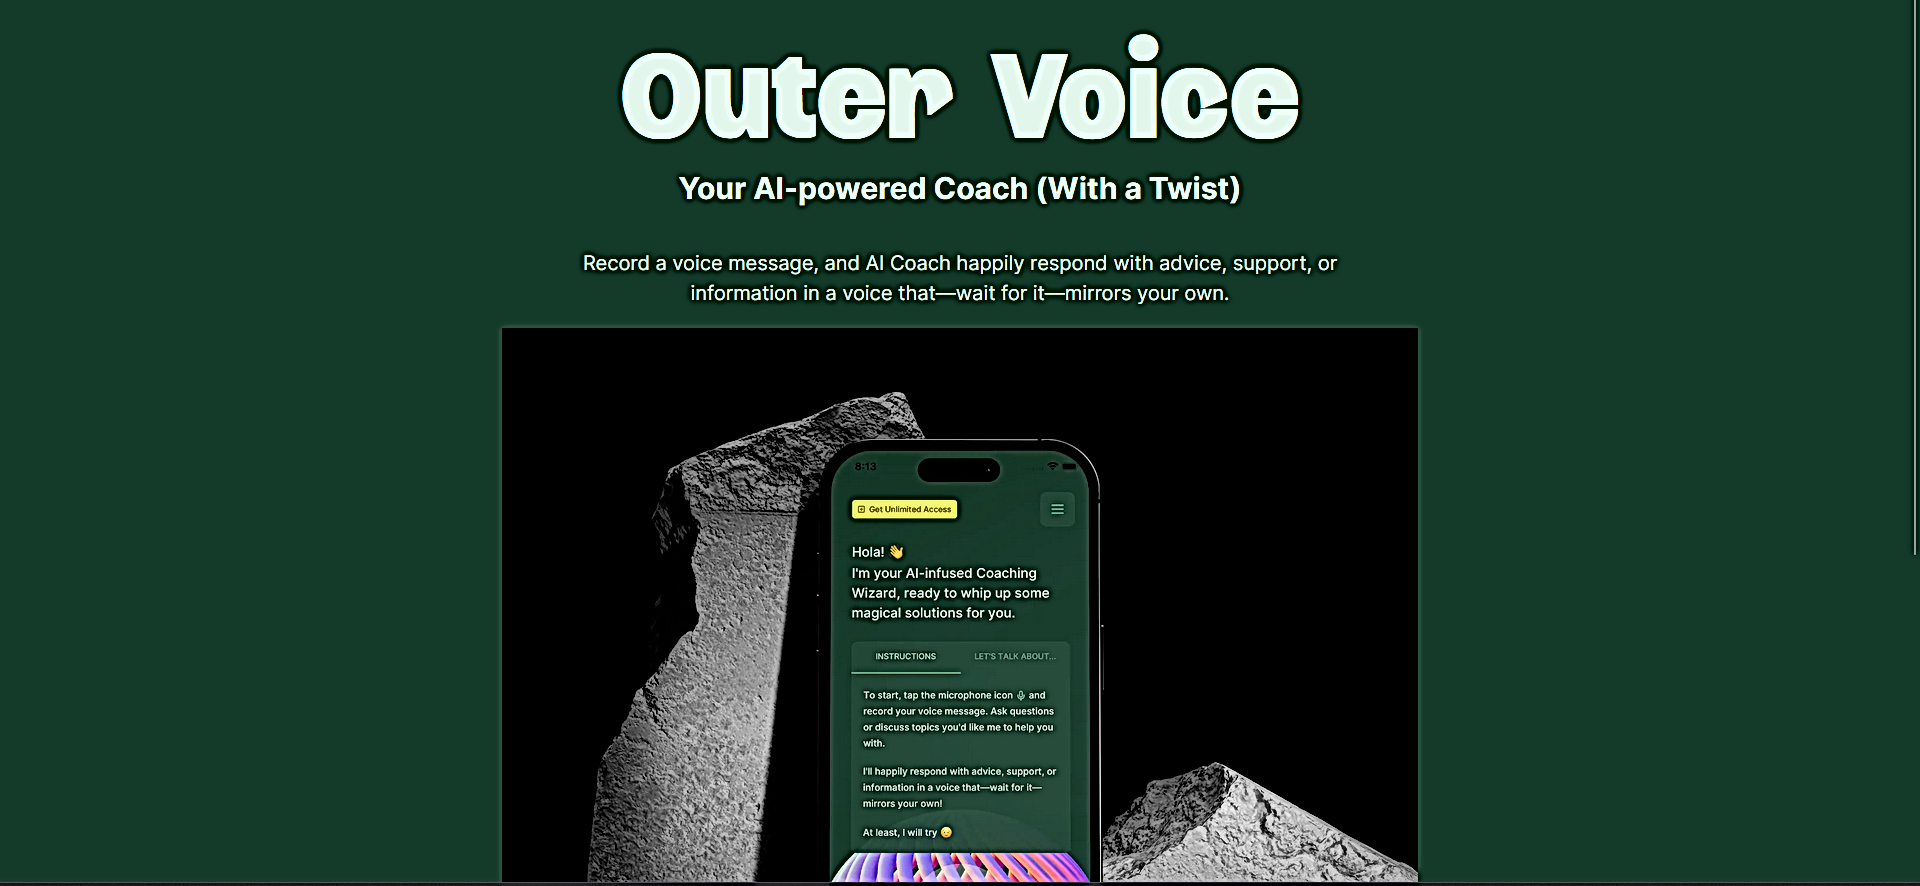 Outer Voice AI featured